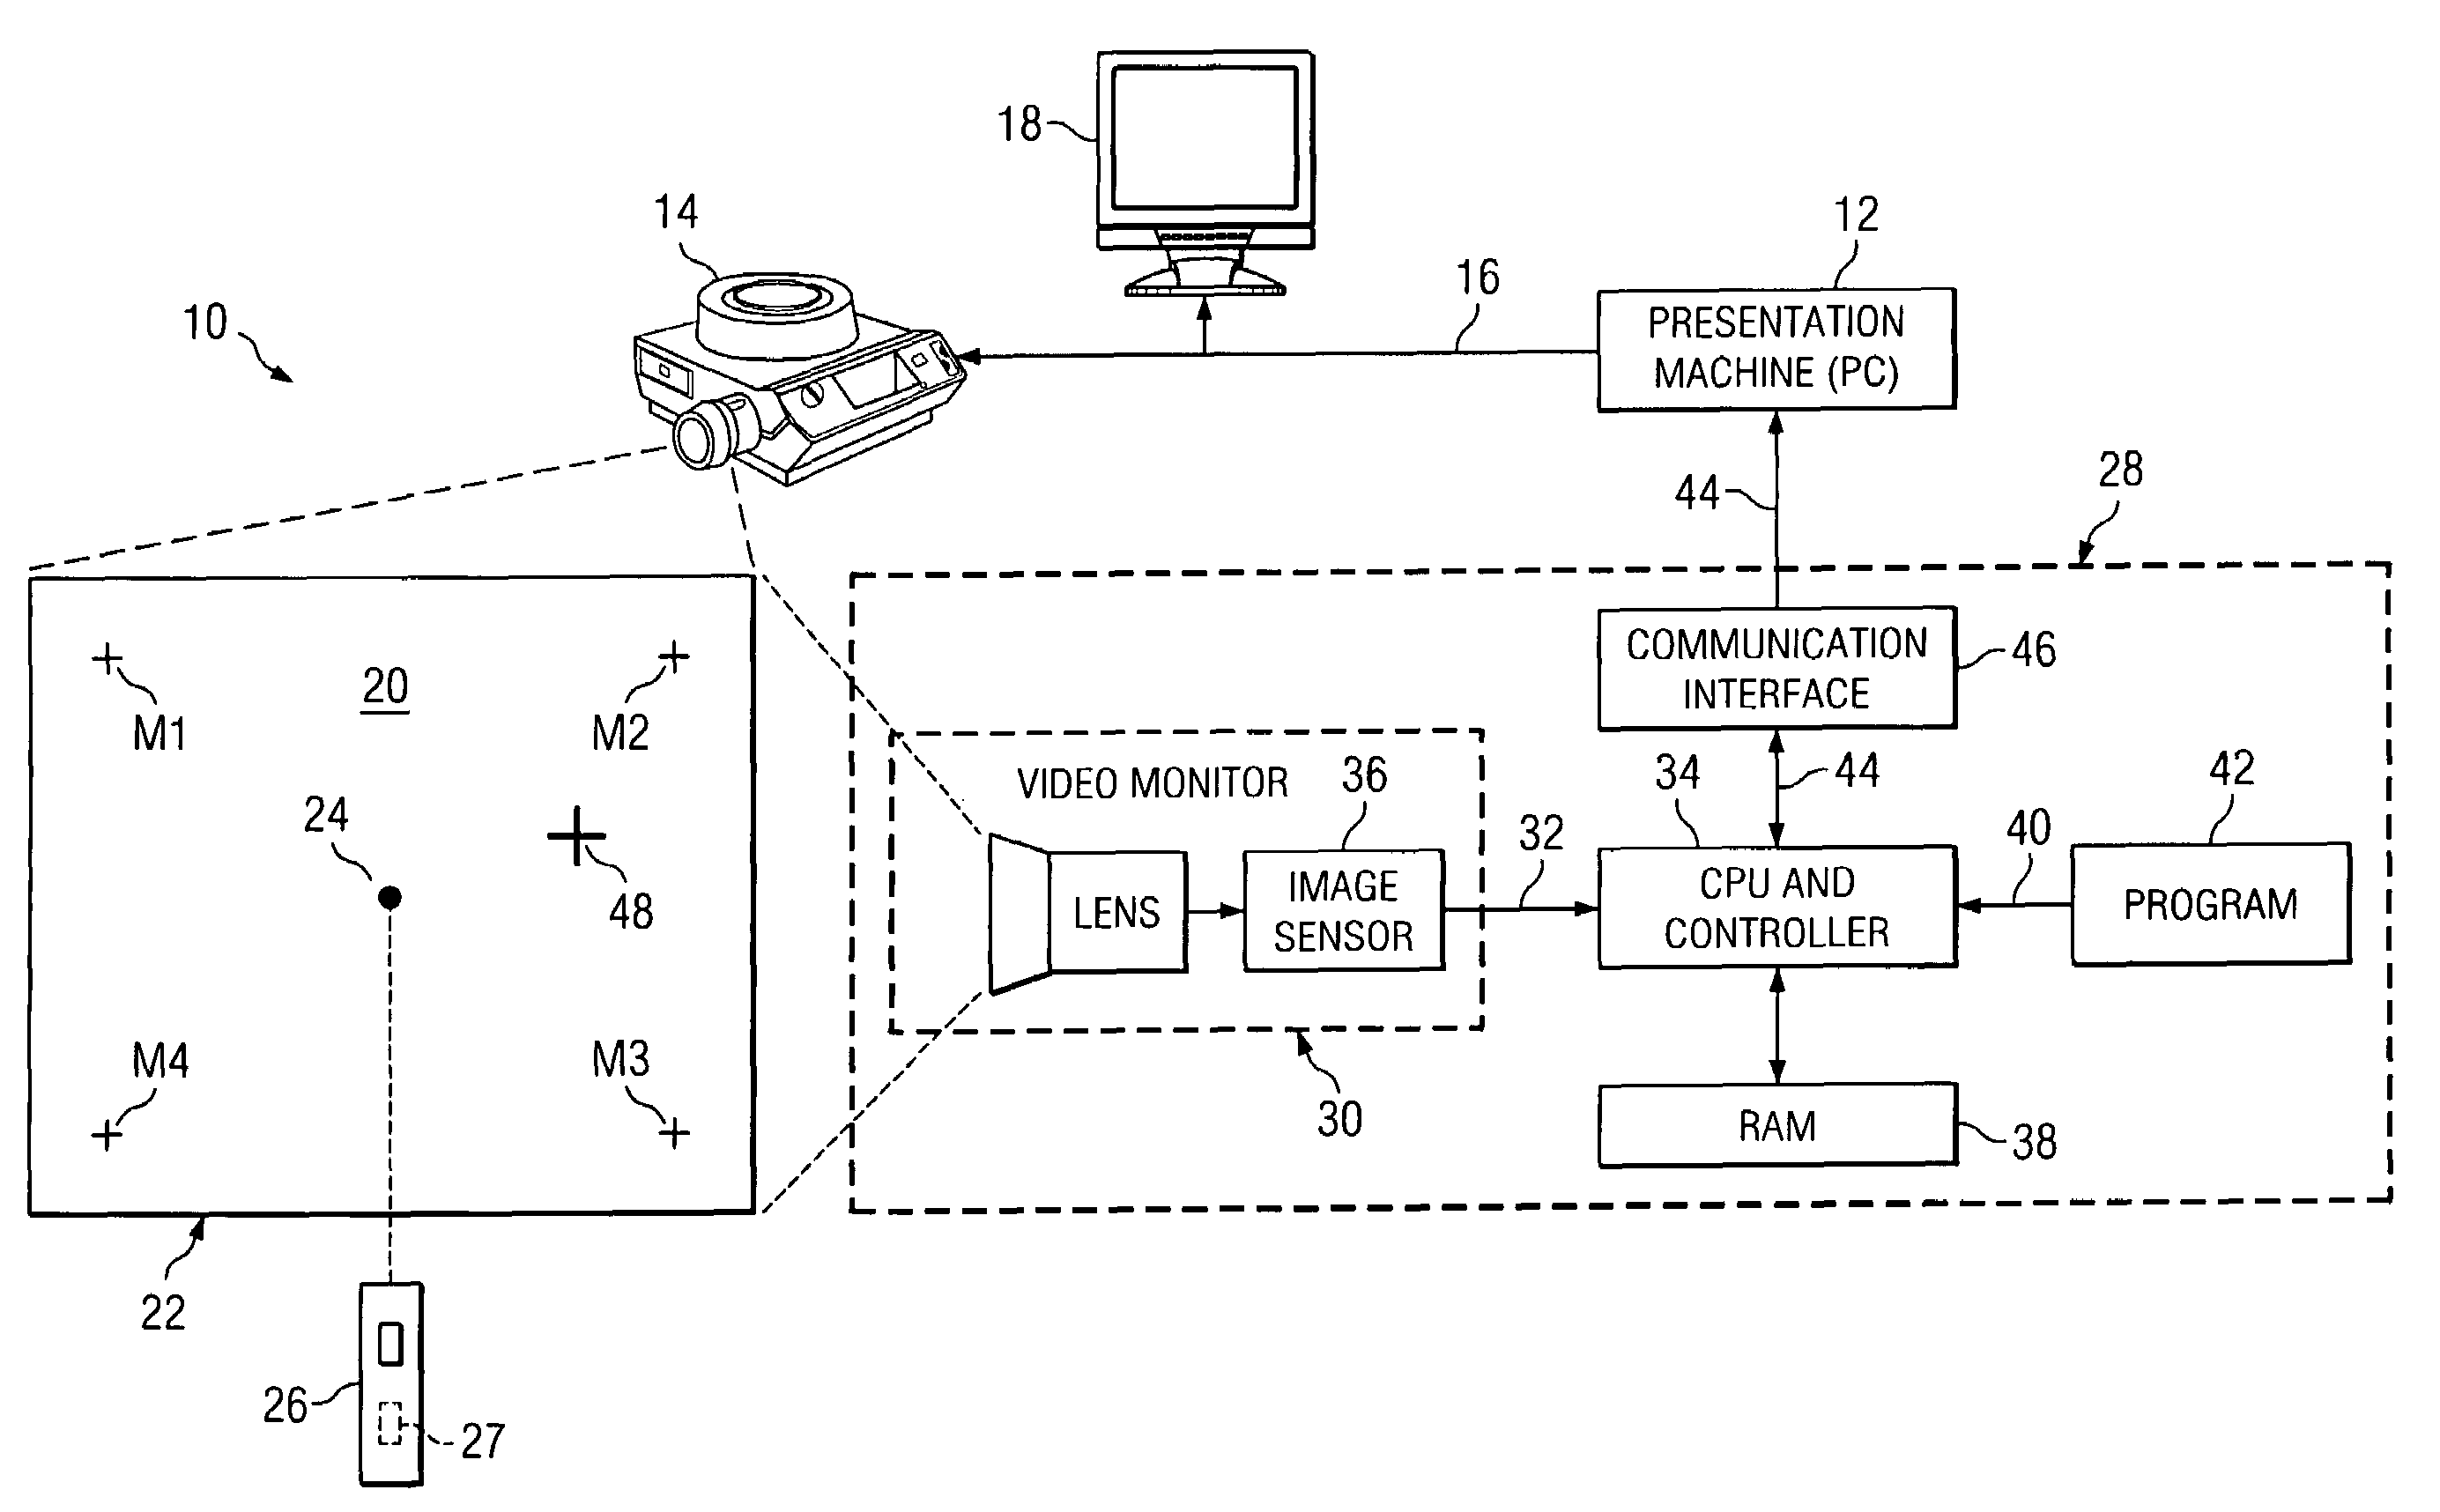 Visual input pointing device for interactive display system